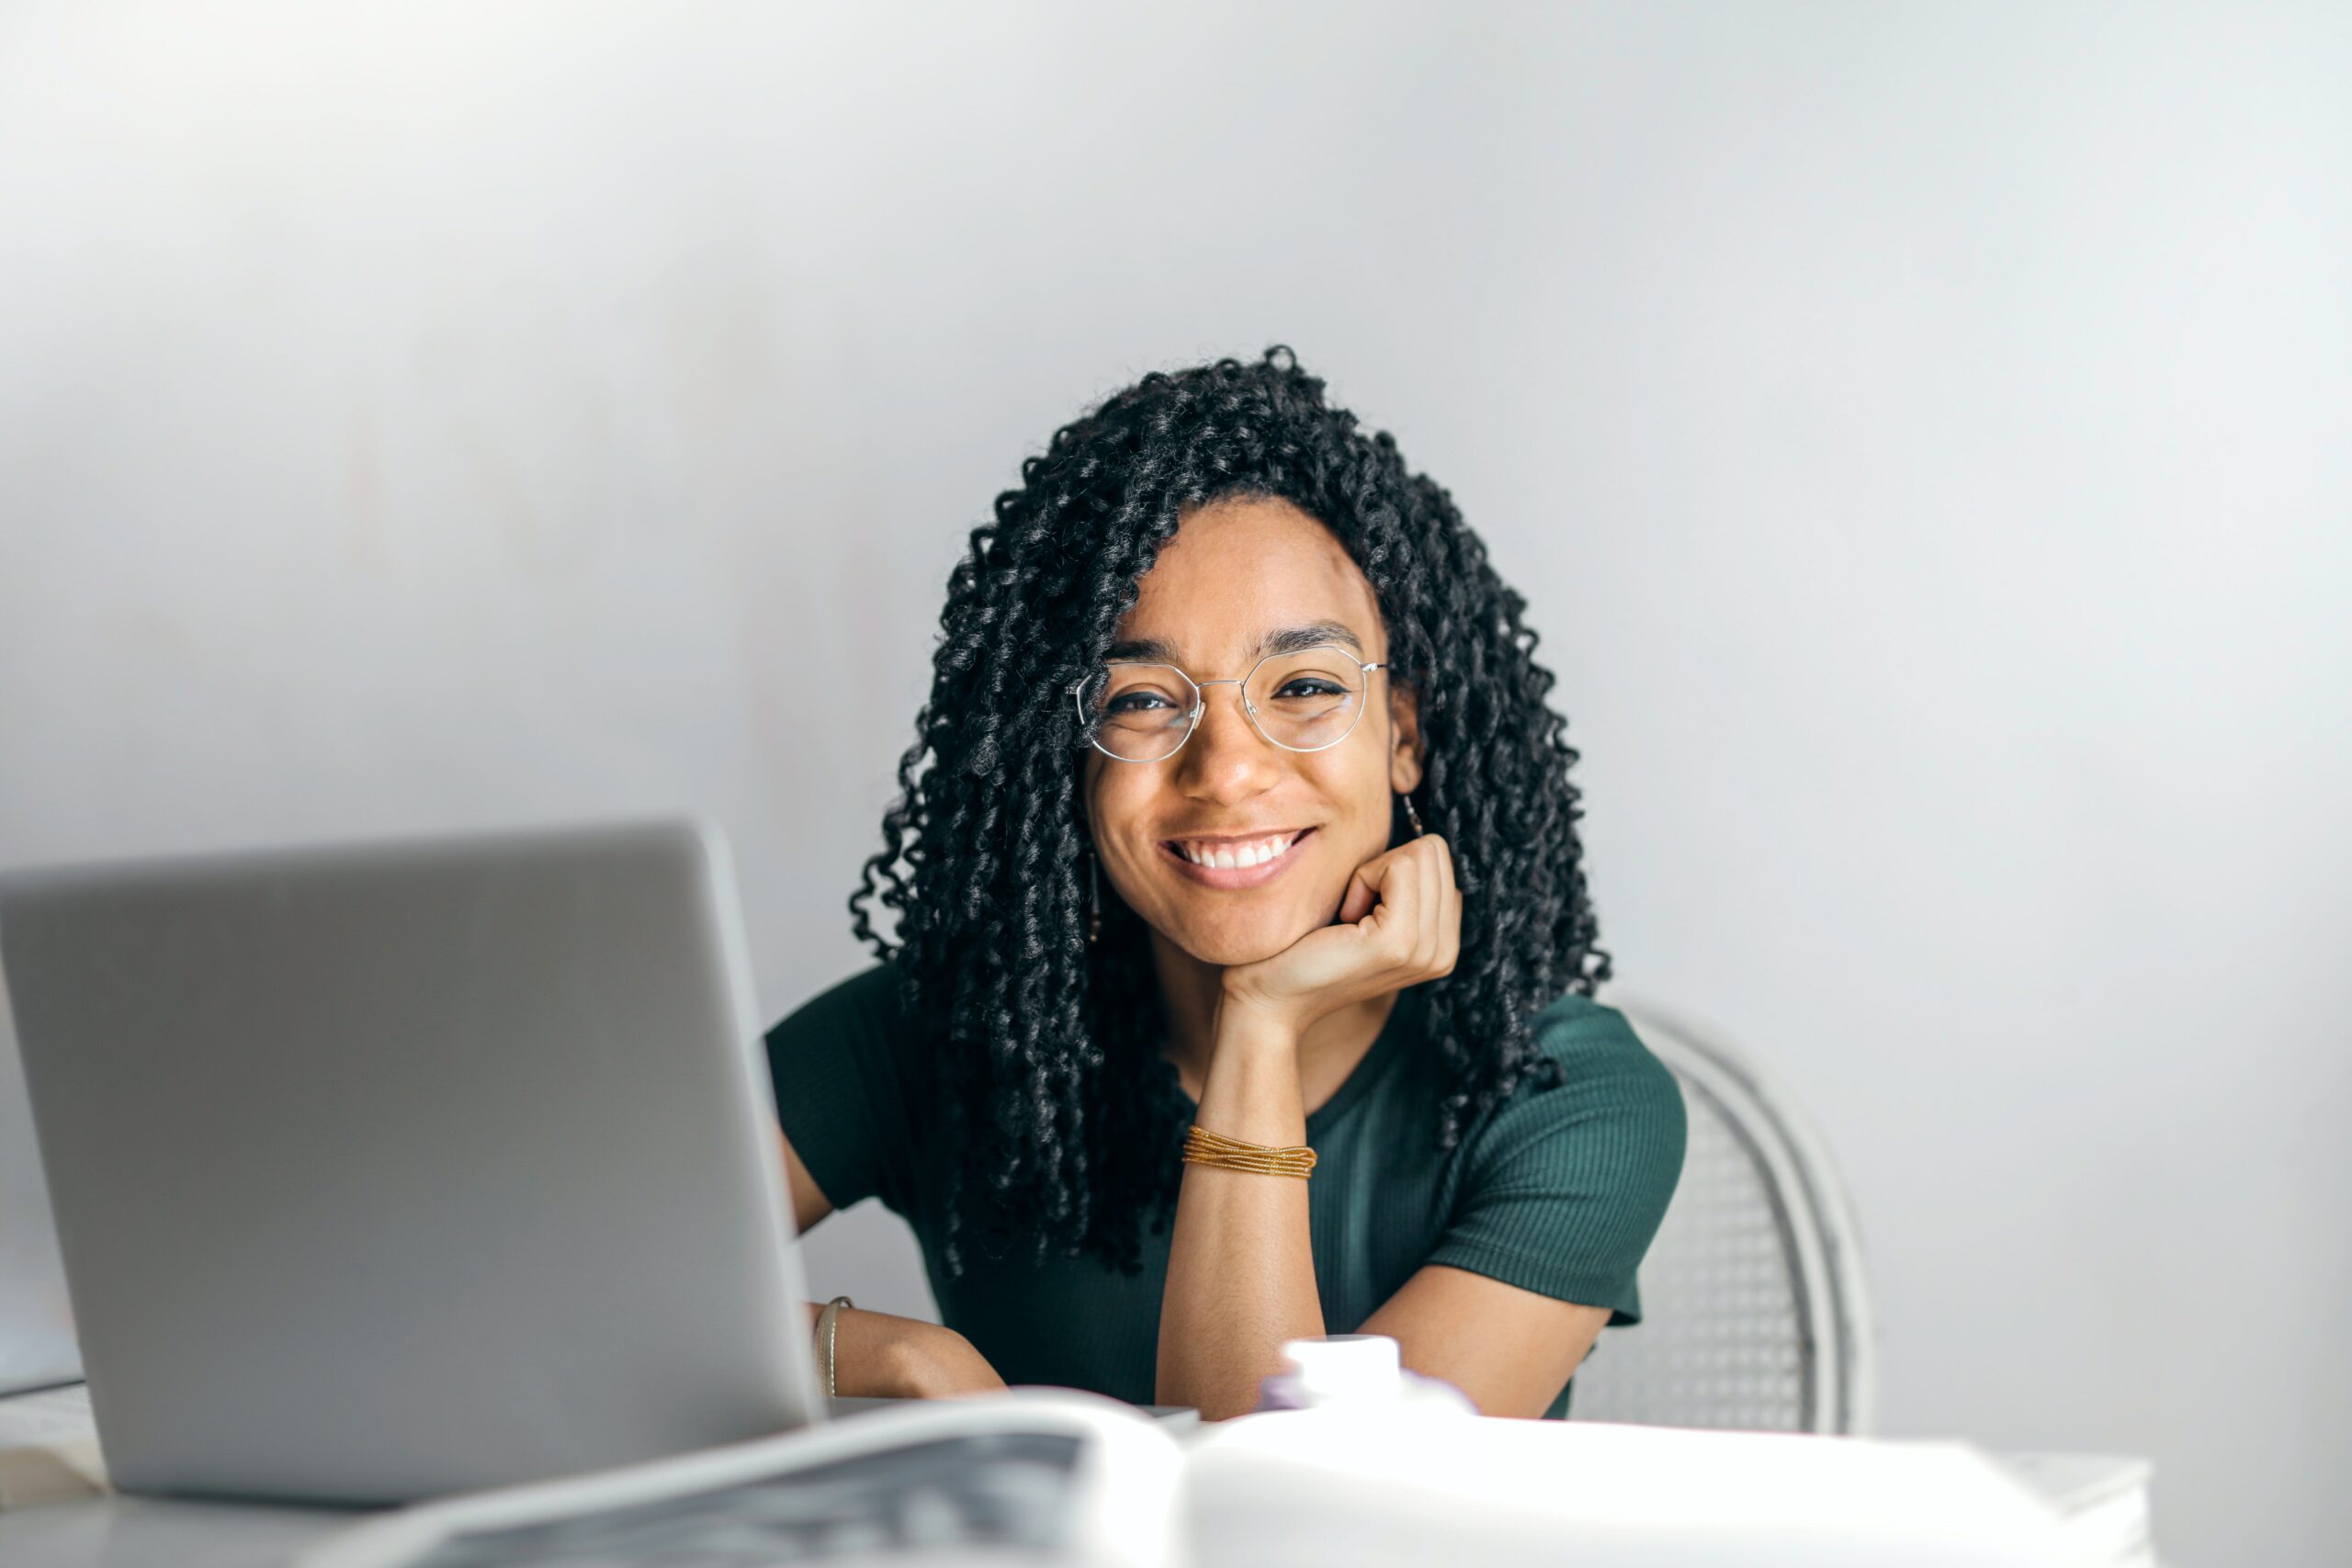 young-woman-with-glasses-smiling-in-front-of-laptop